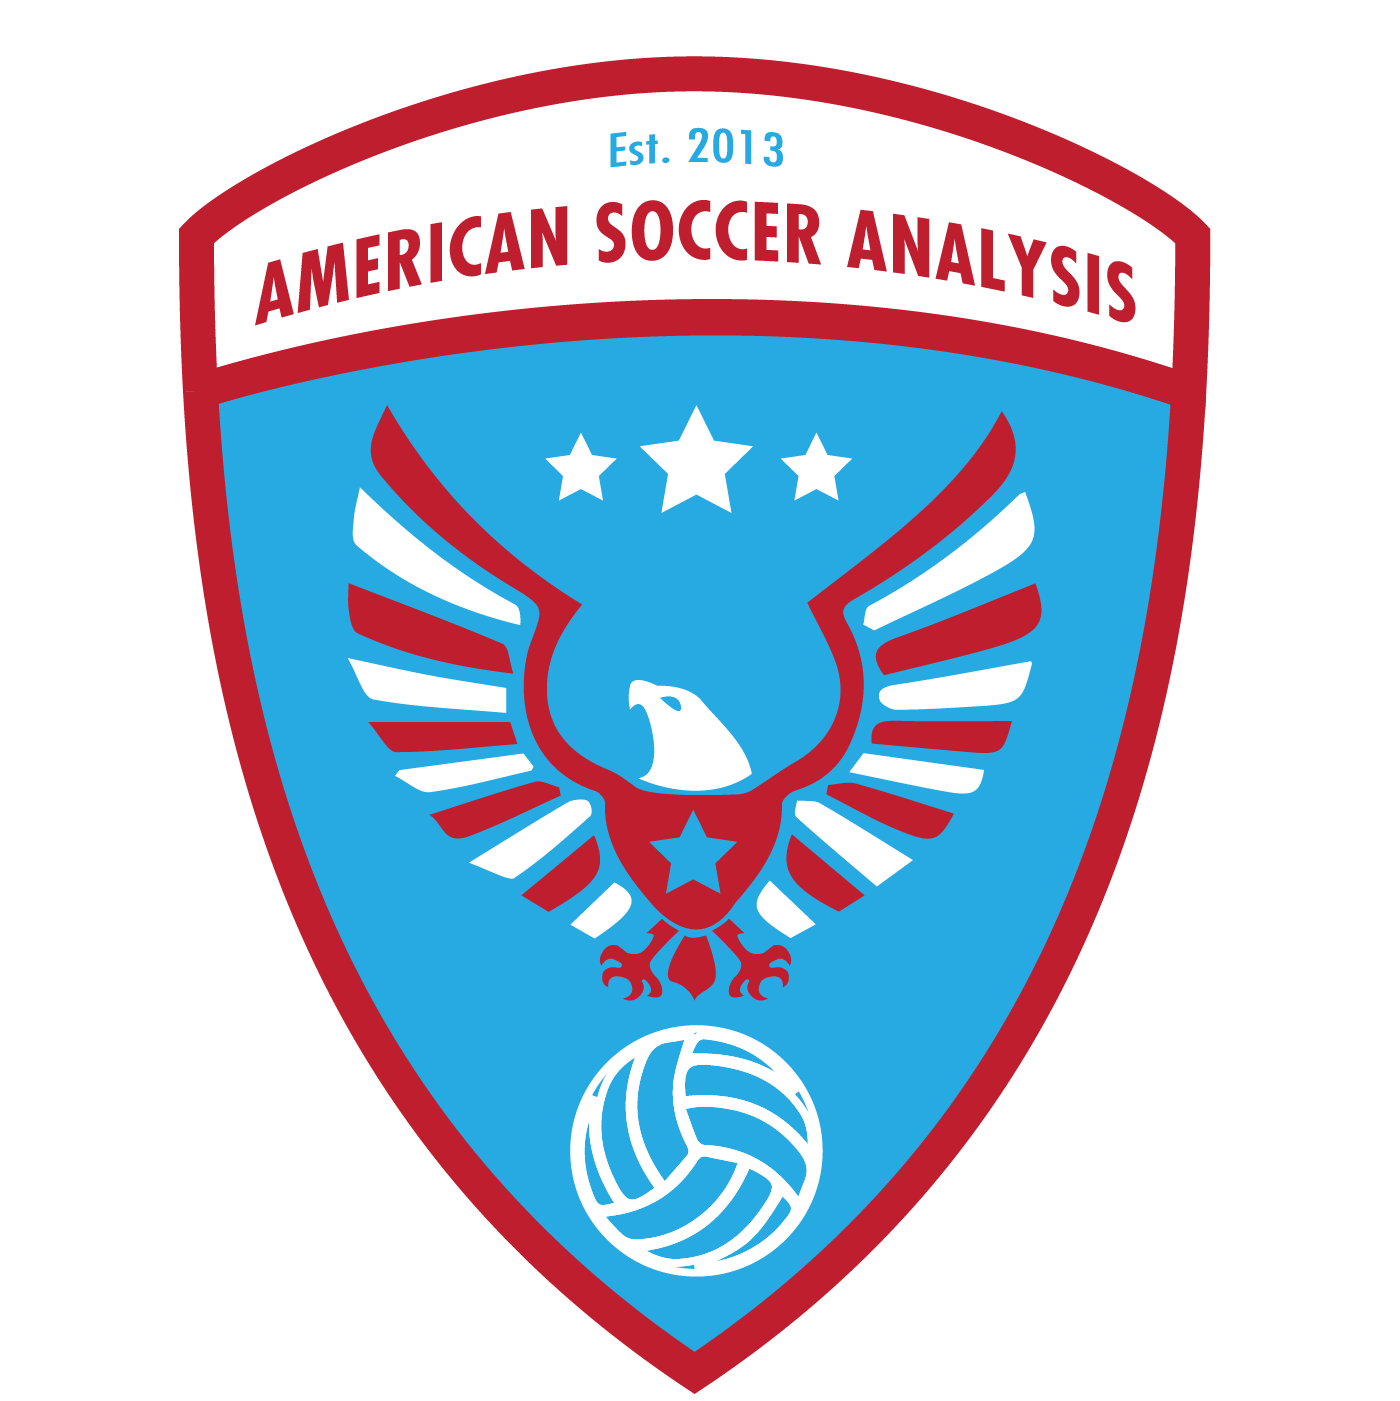 Single Game xG is here to stay - is it useful? — American Soccer Analysis